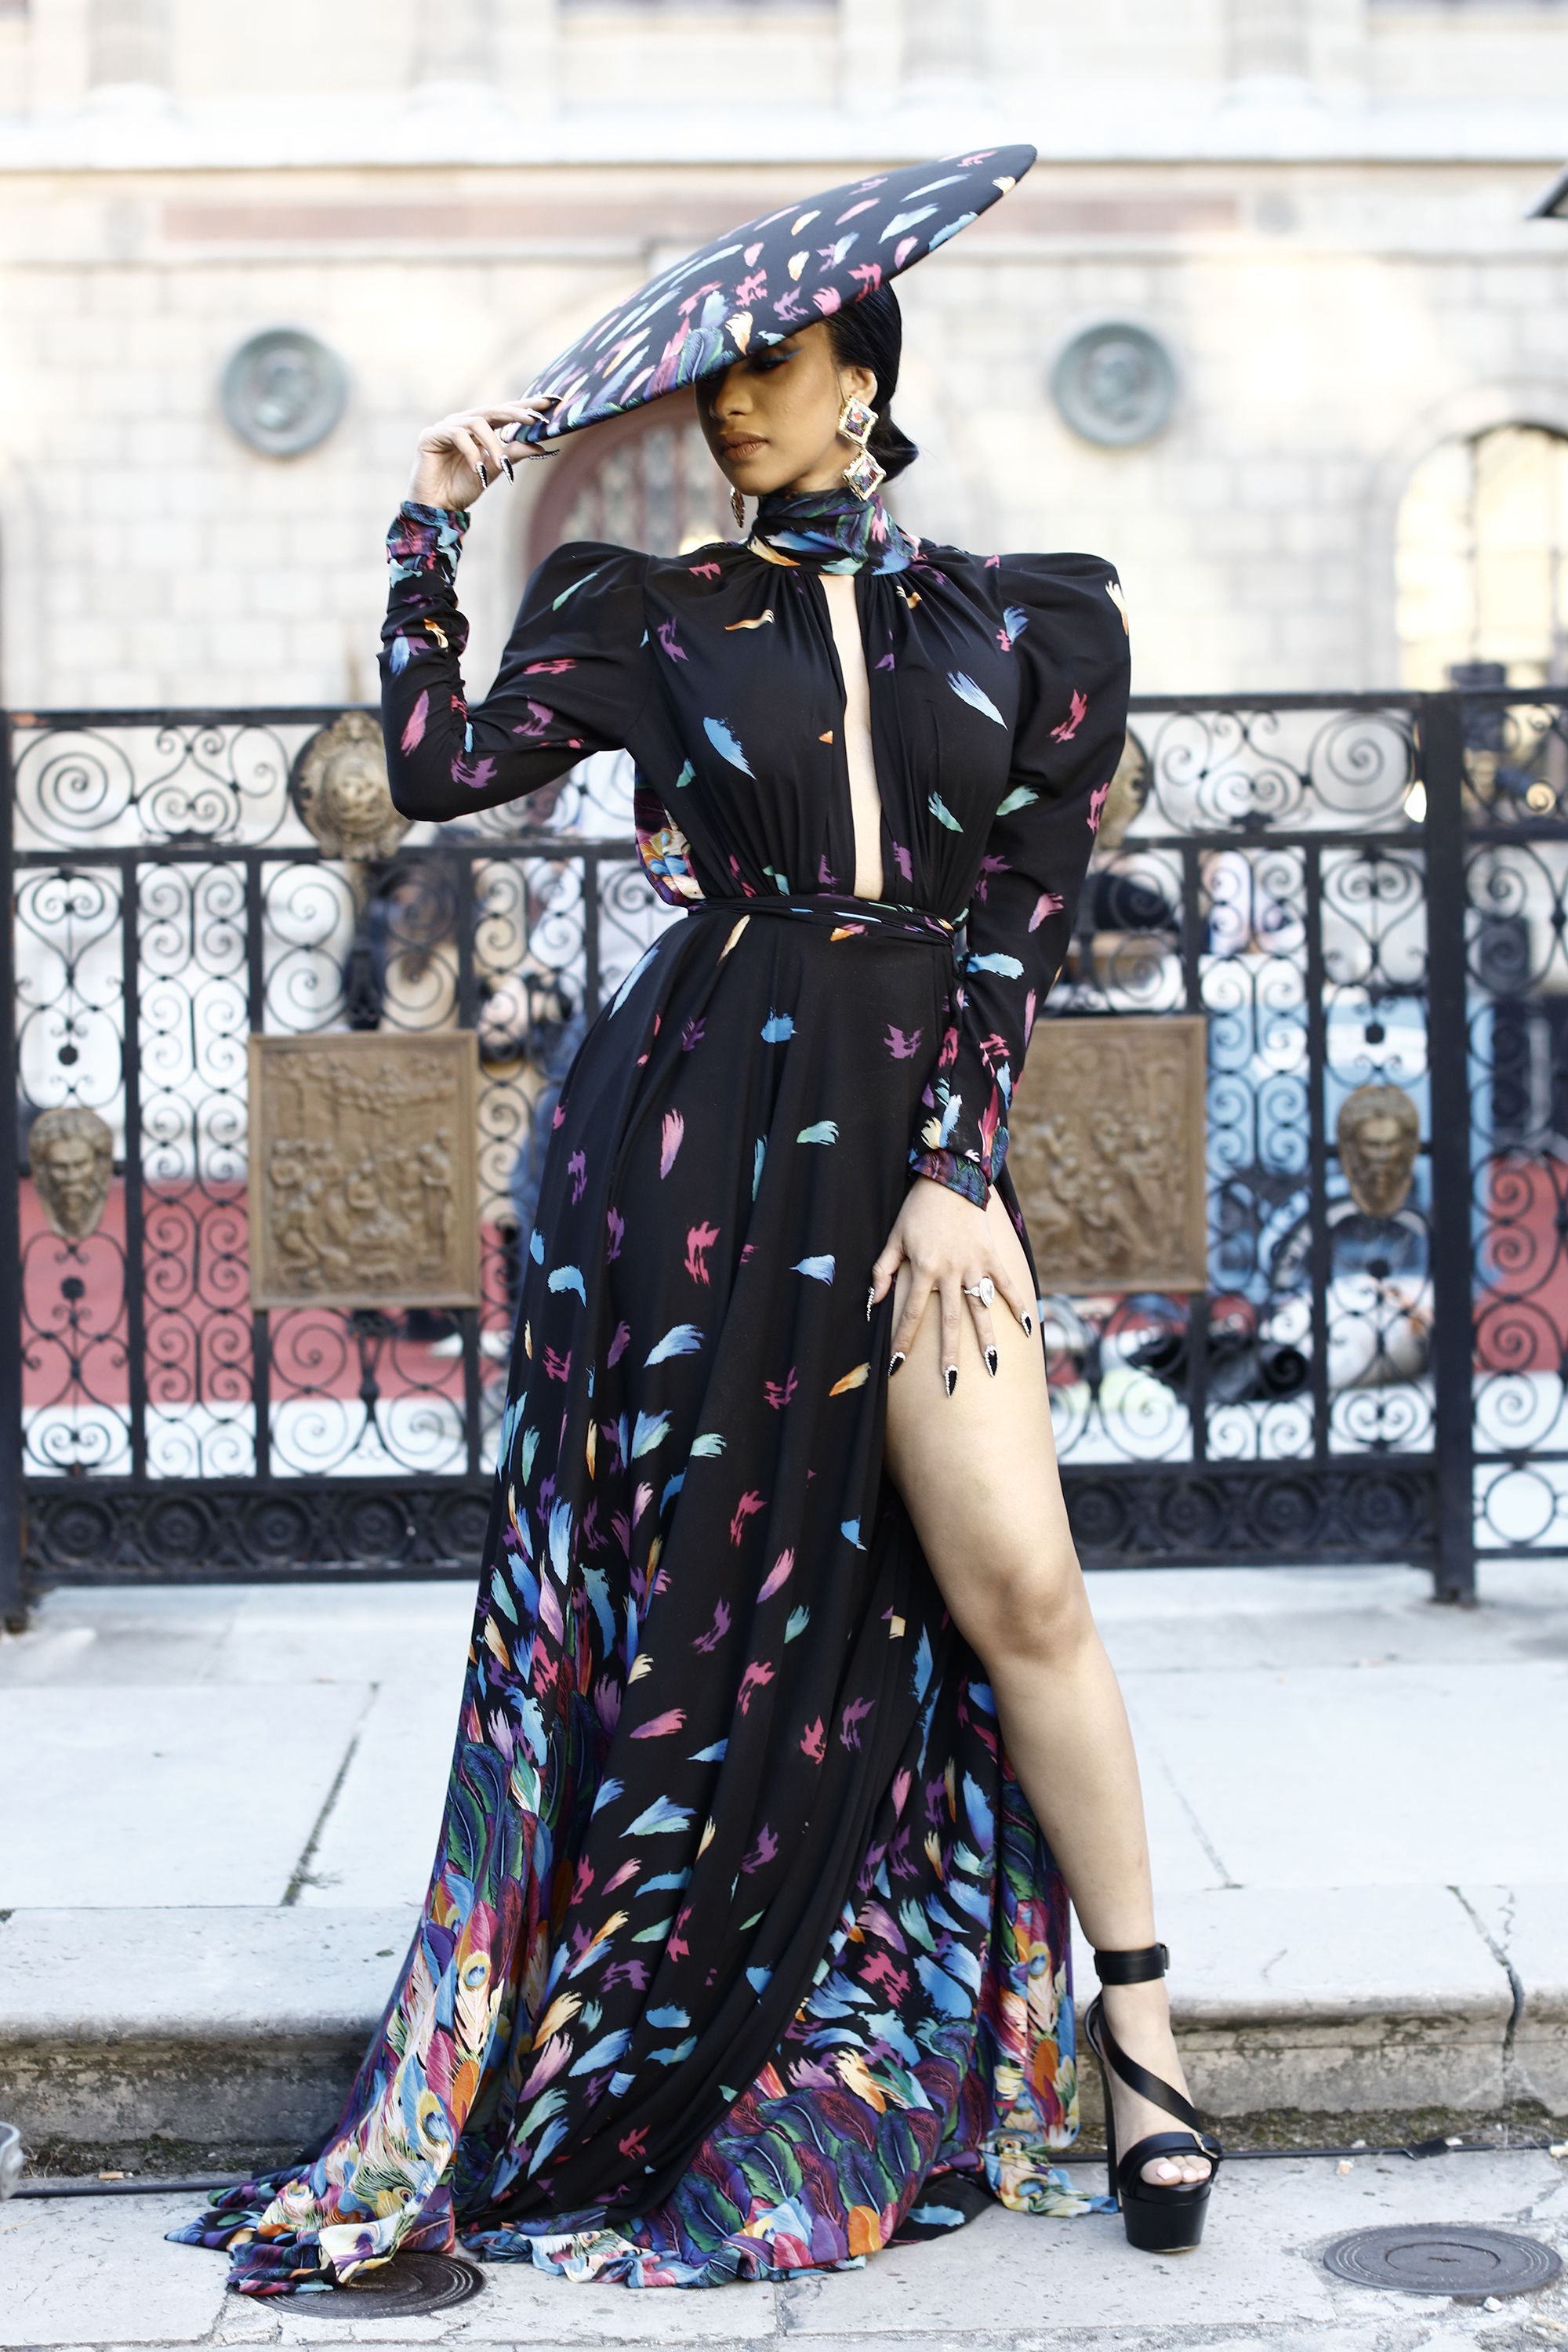 Instagram Style: Cardi B in Christian Siriano Heading to Court